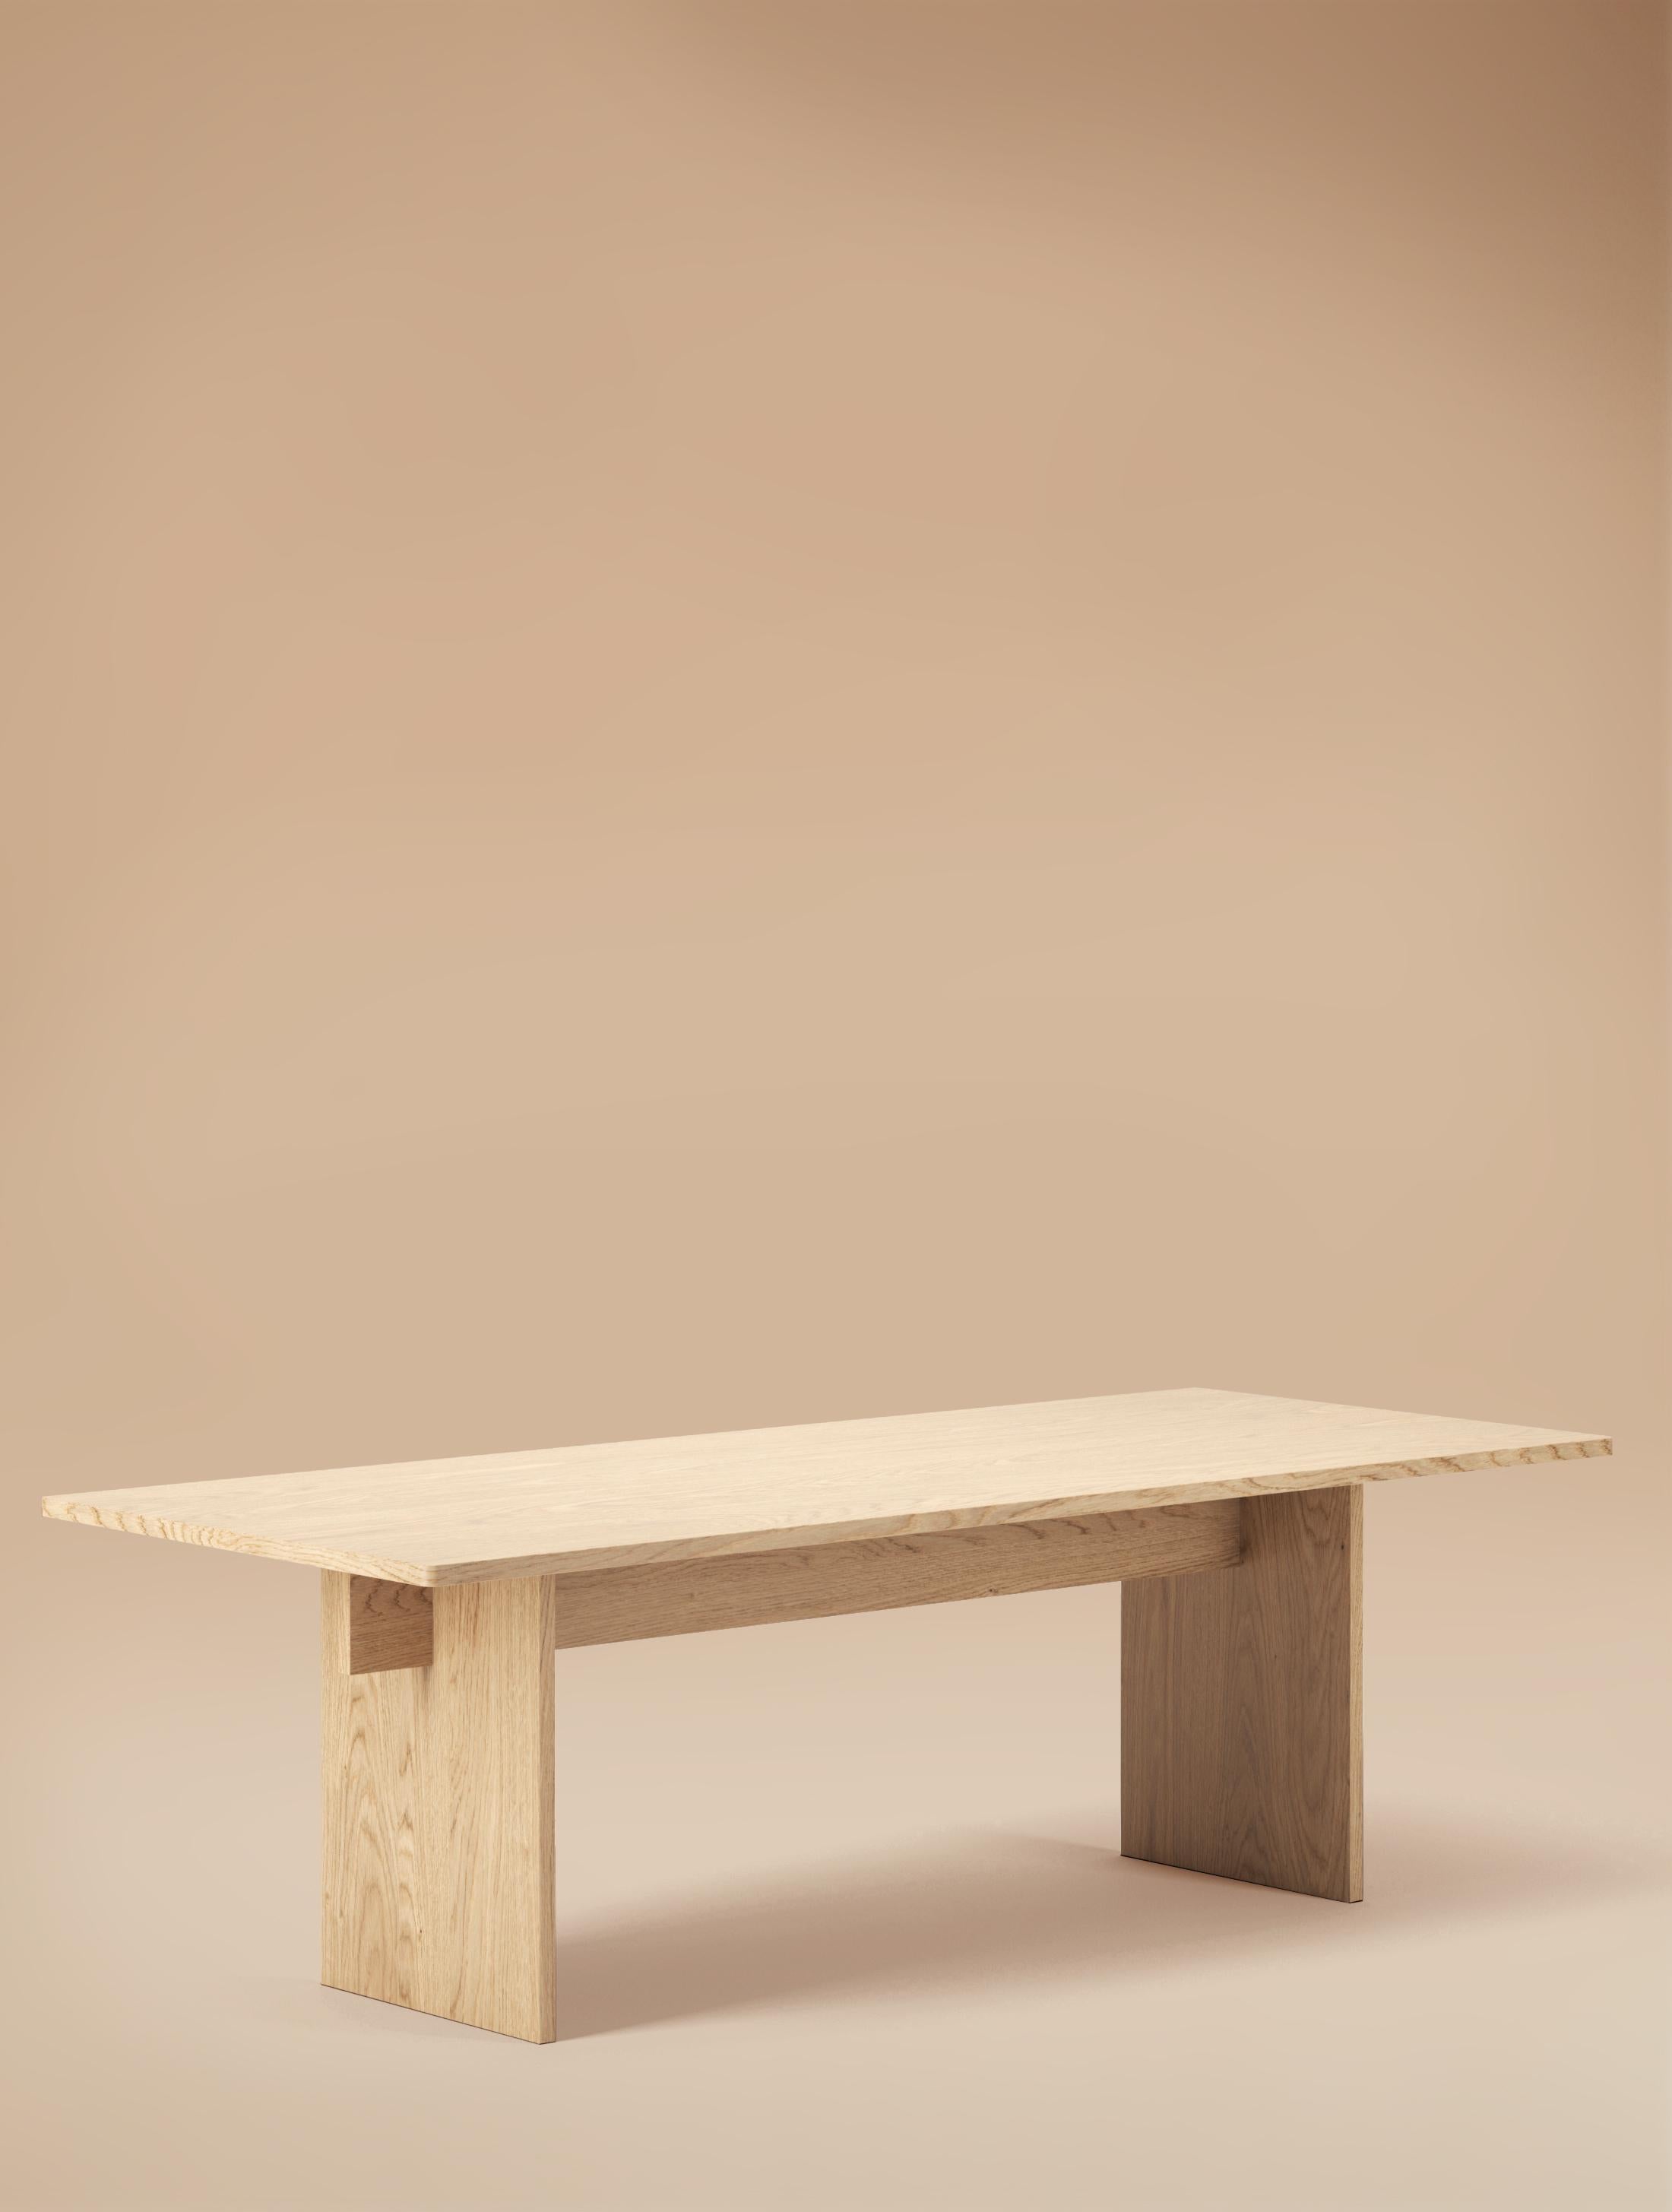 8 Seater  Faure Table Handcrafted in Walnut by Kevin Frankental for Lemon  10